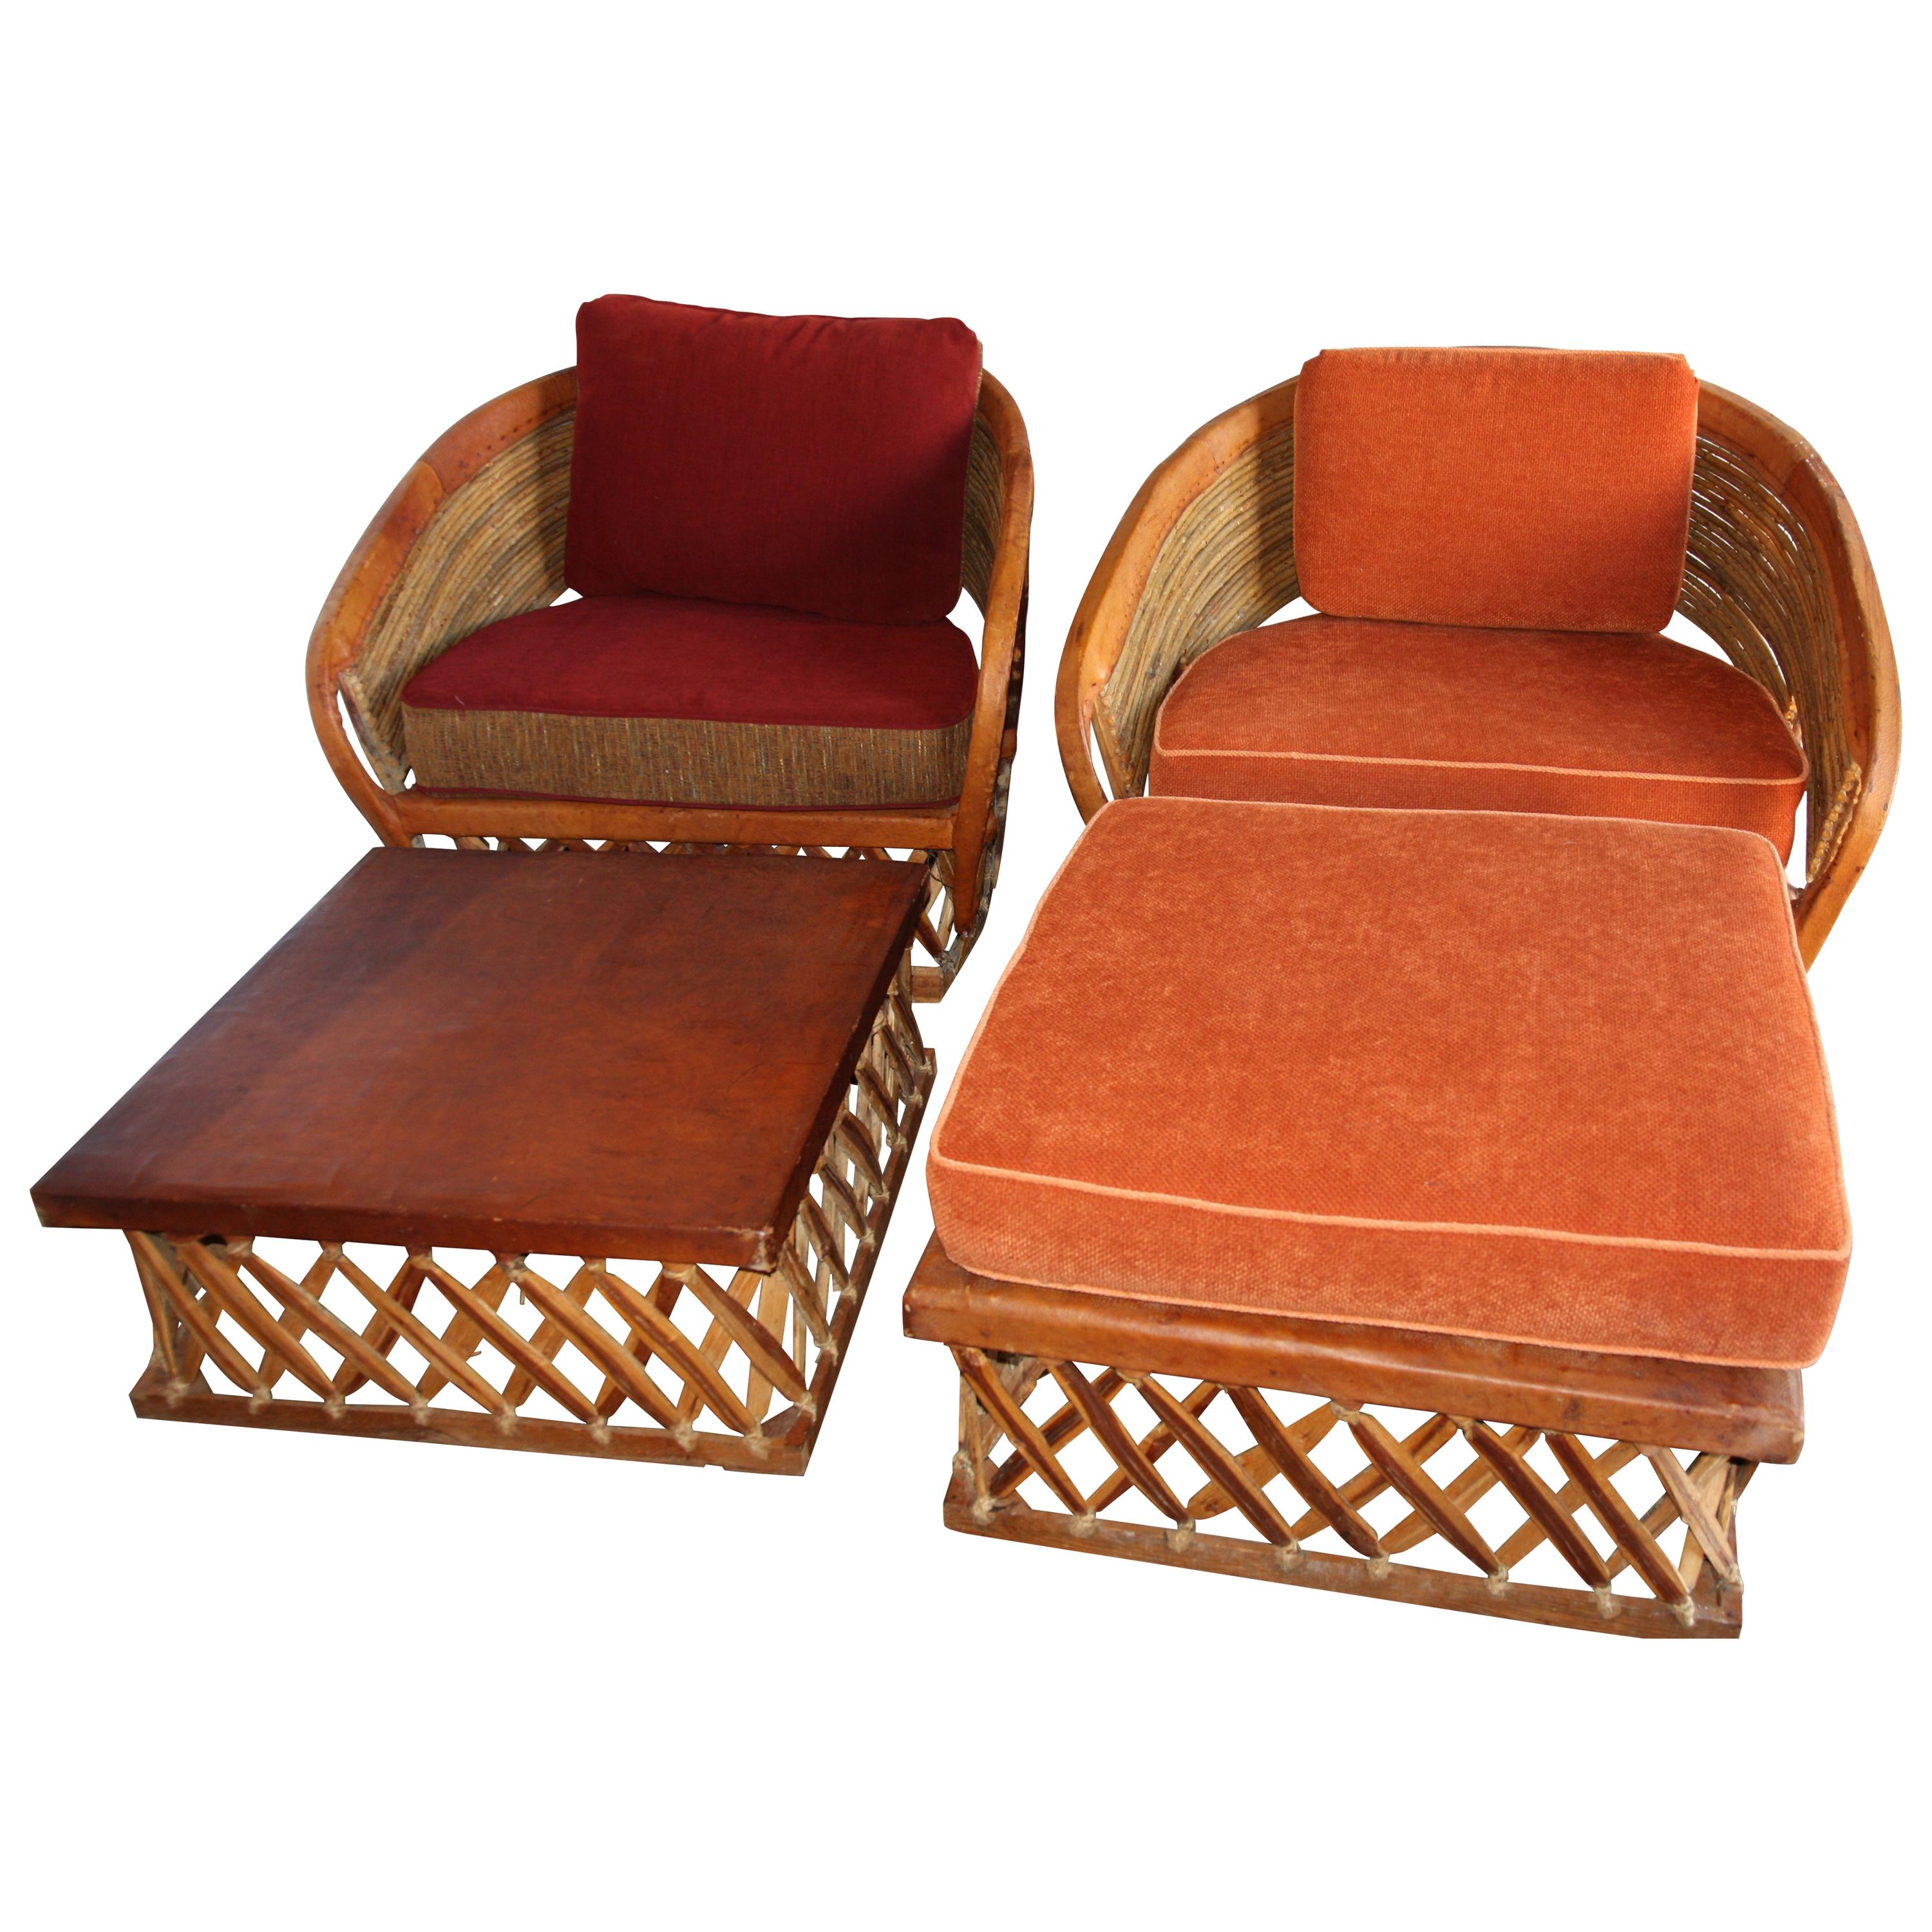 Pair of Uniquely Large Equipale Lounge Chairs with Ottomans